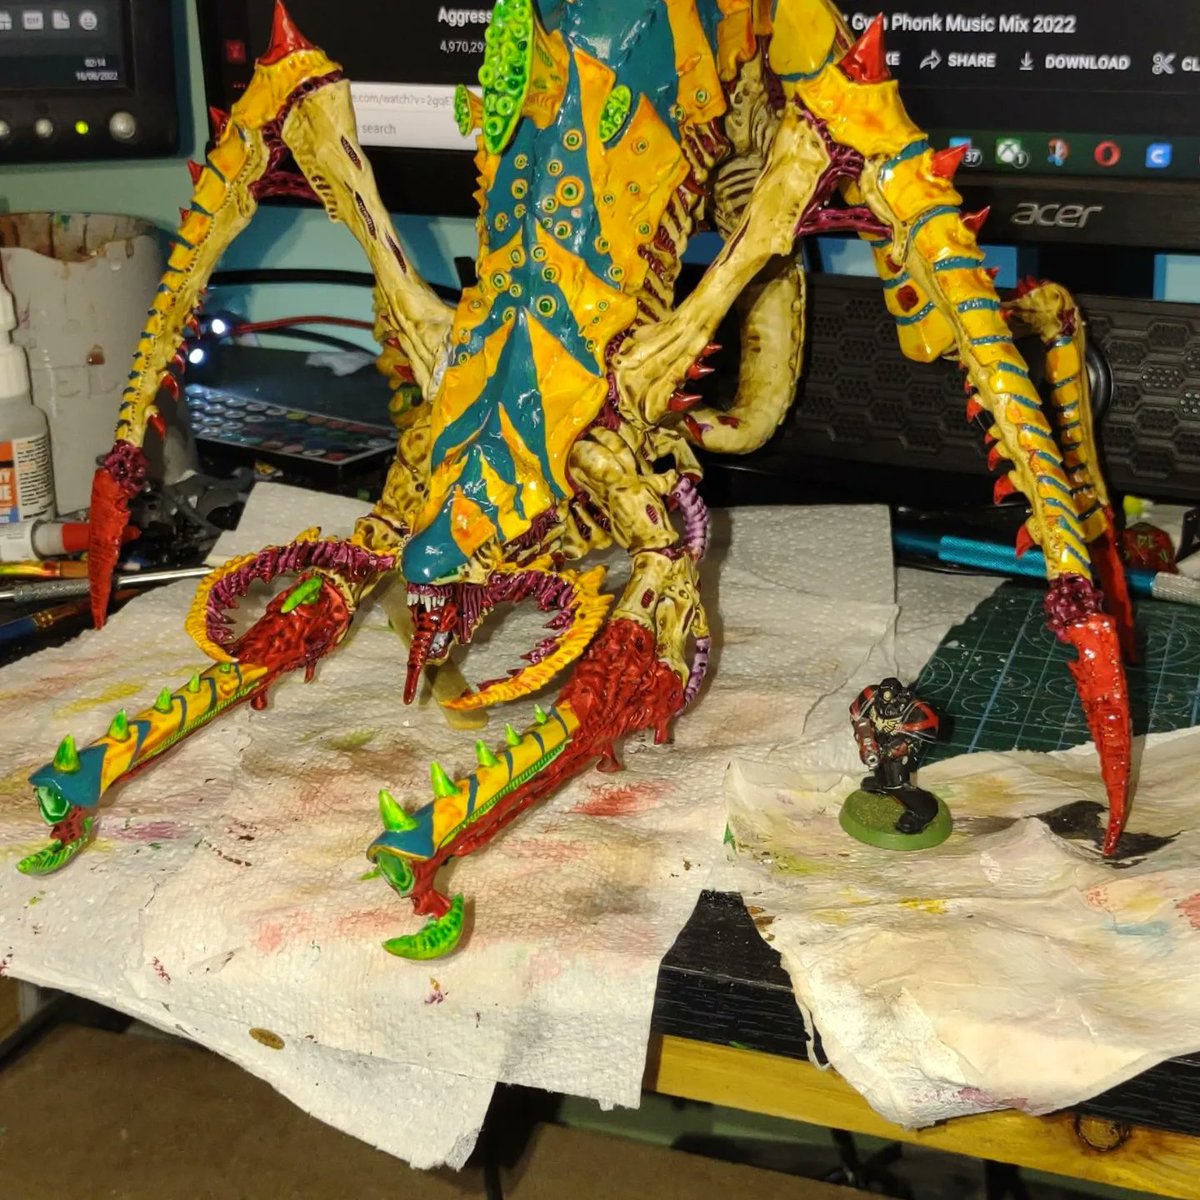 This was only built 4 days ago and already painted ready for the field, liam's secret is simply having a plan and keeping to it. Very nice work.
#WarhammerCommunity #warhammer40k #tyranids40k #paintingwarhammer